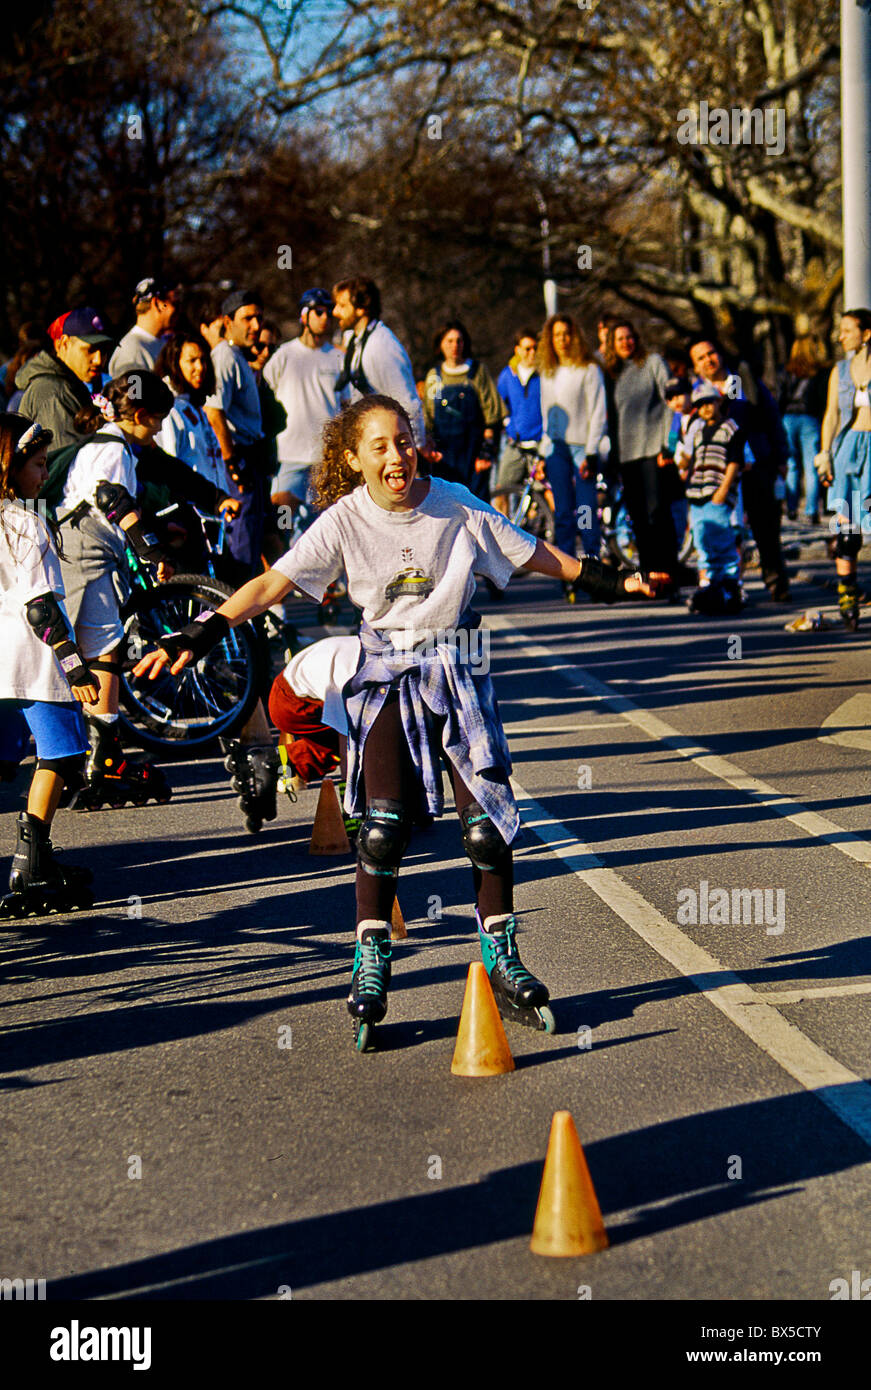 Children on rollerblade skates negotiate an obstacle course on a winter afternoon in Central Park, New York City. Stock Photo